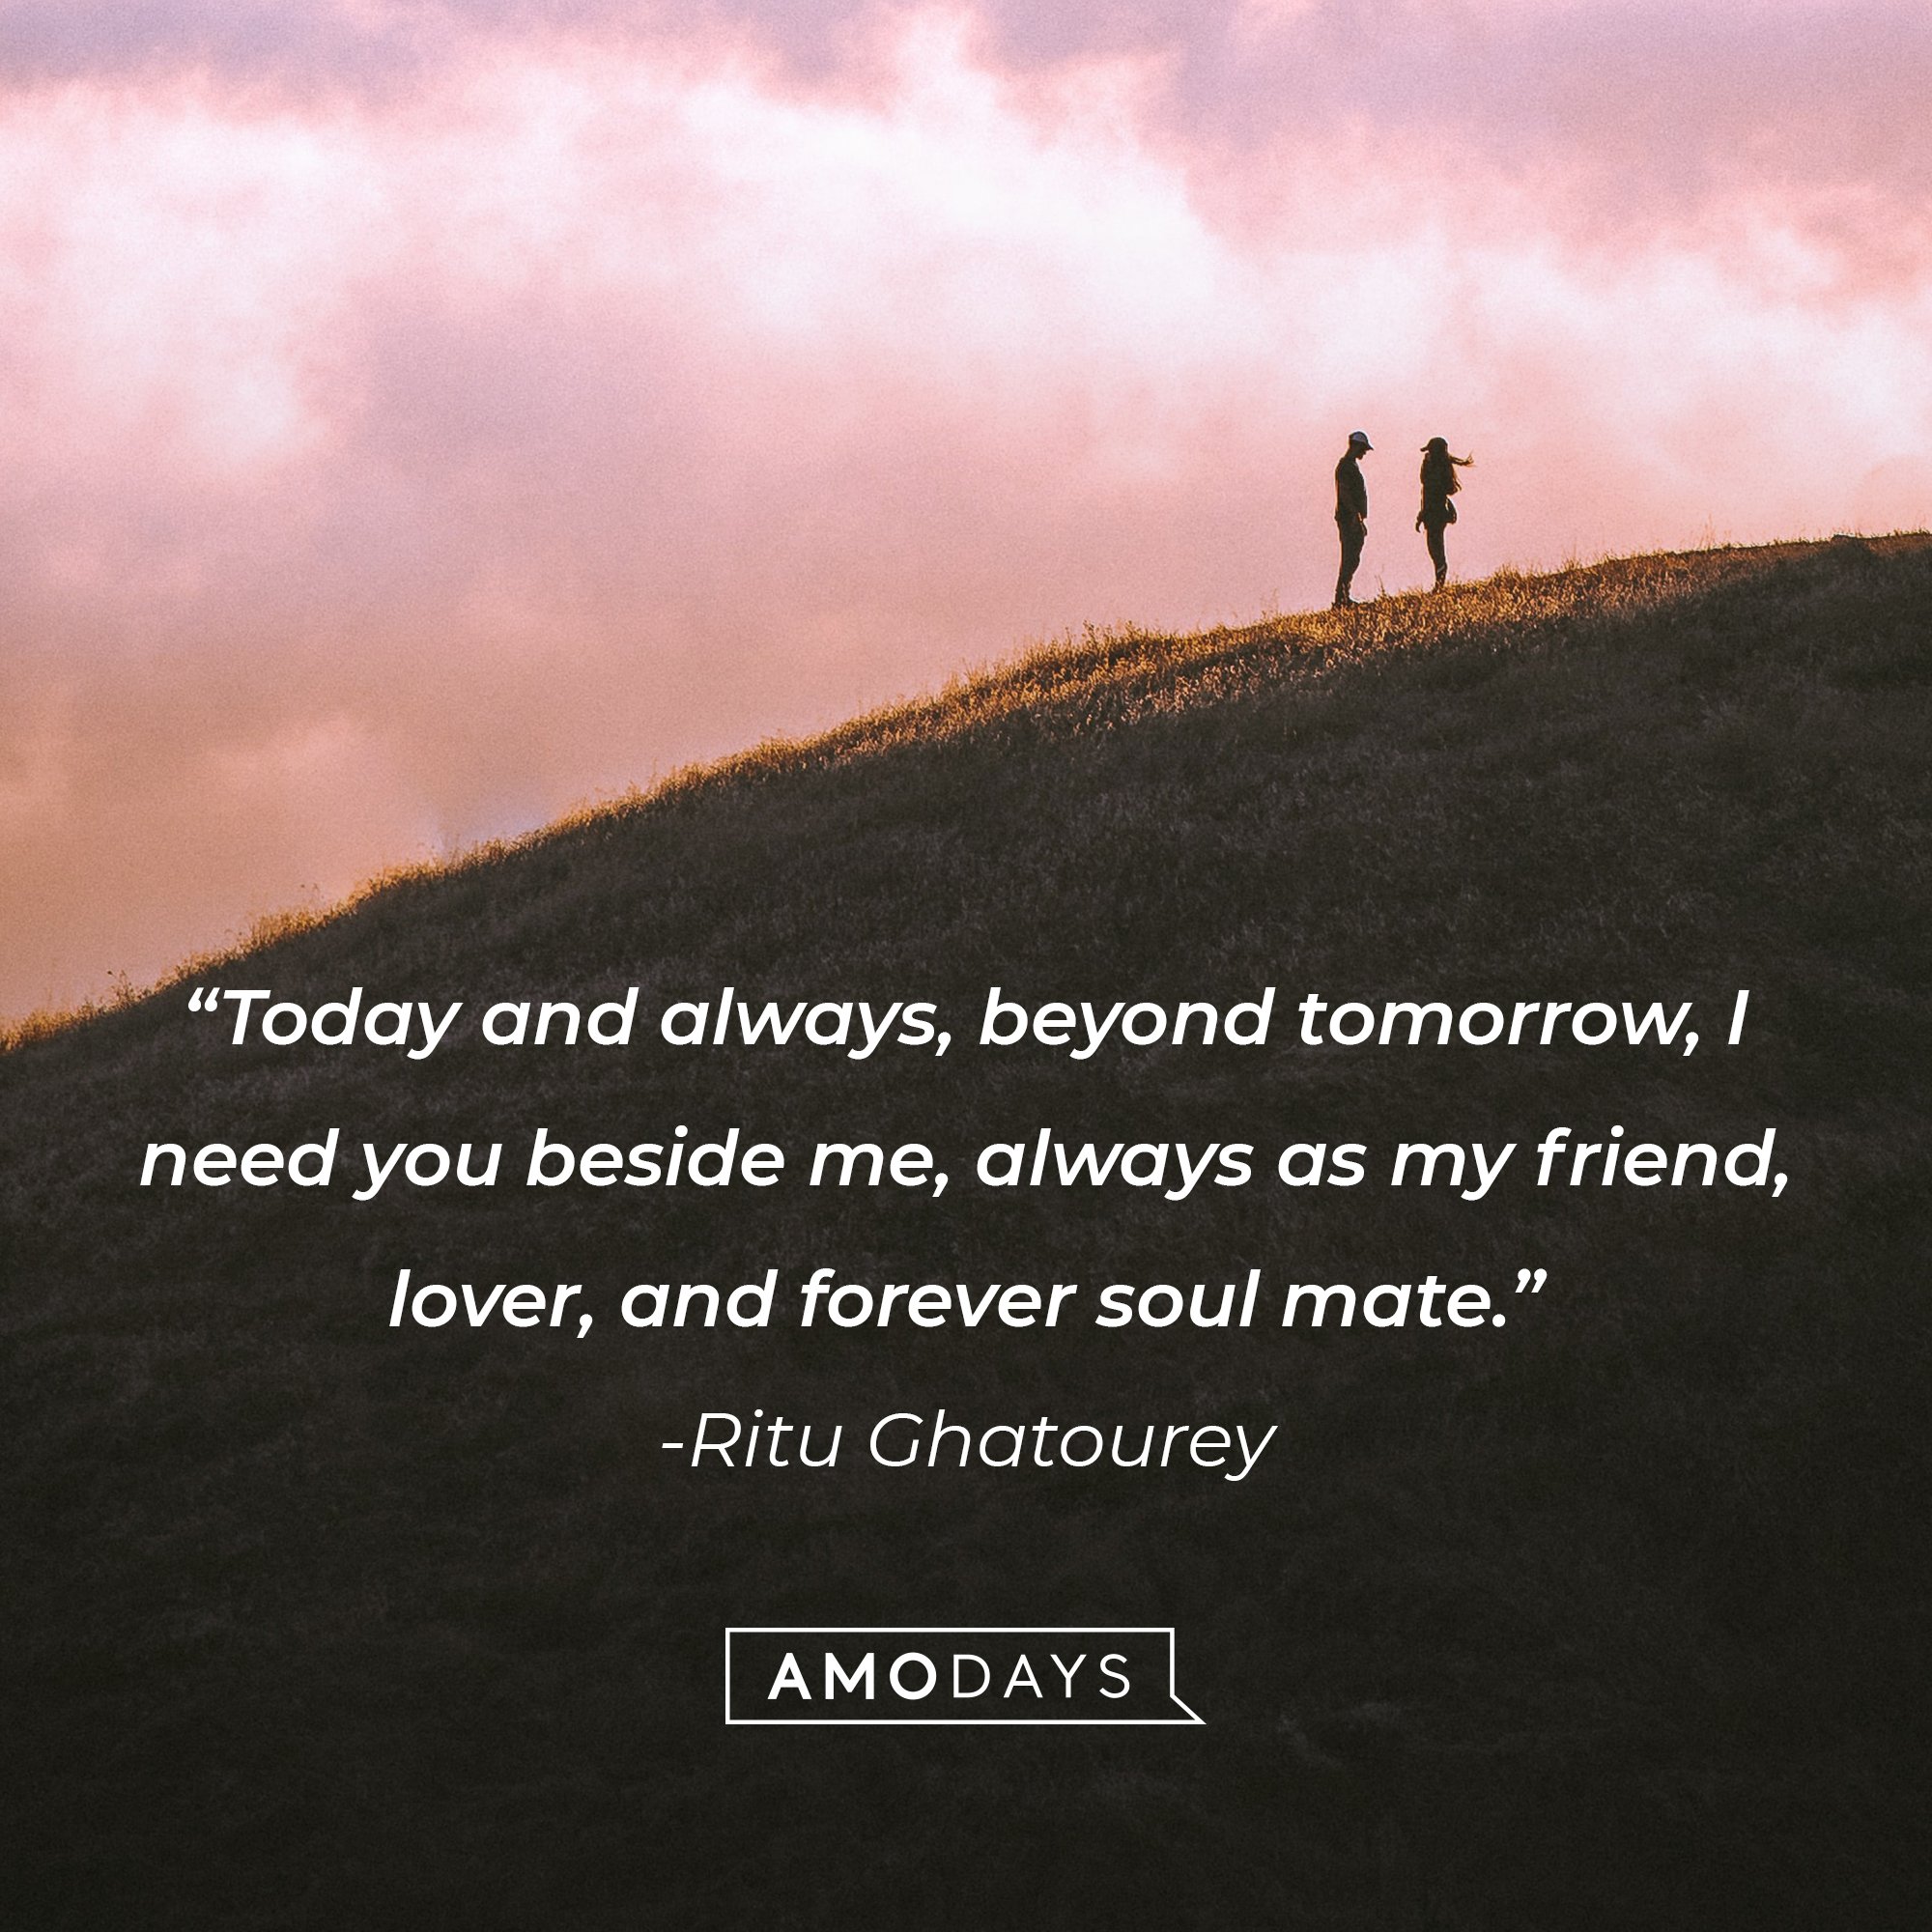 Ritu Ghatourey’s quote: "Today and always, beyond tomorrow, I need you beside me, always as my friend, lover, and forever soul mate." | Image: AmoDays